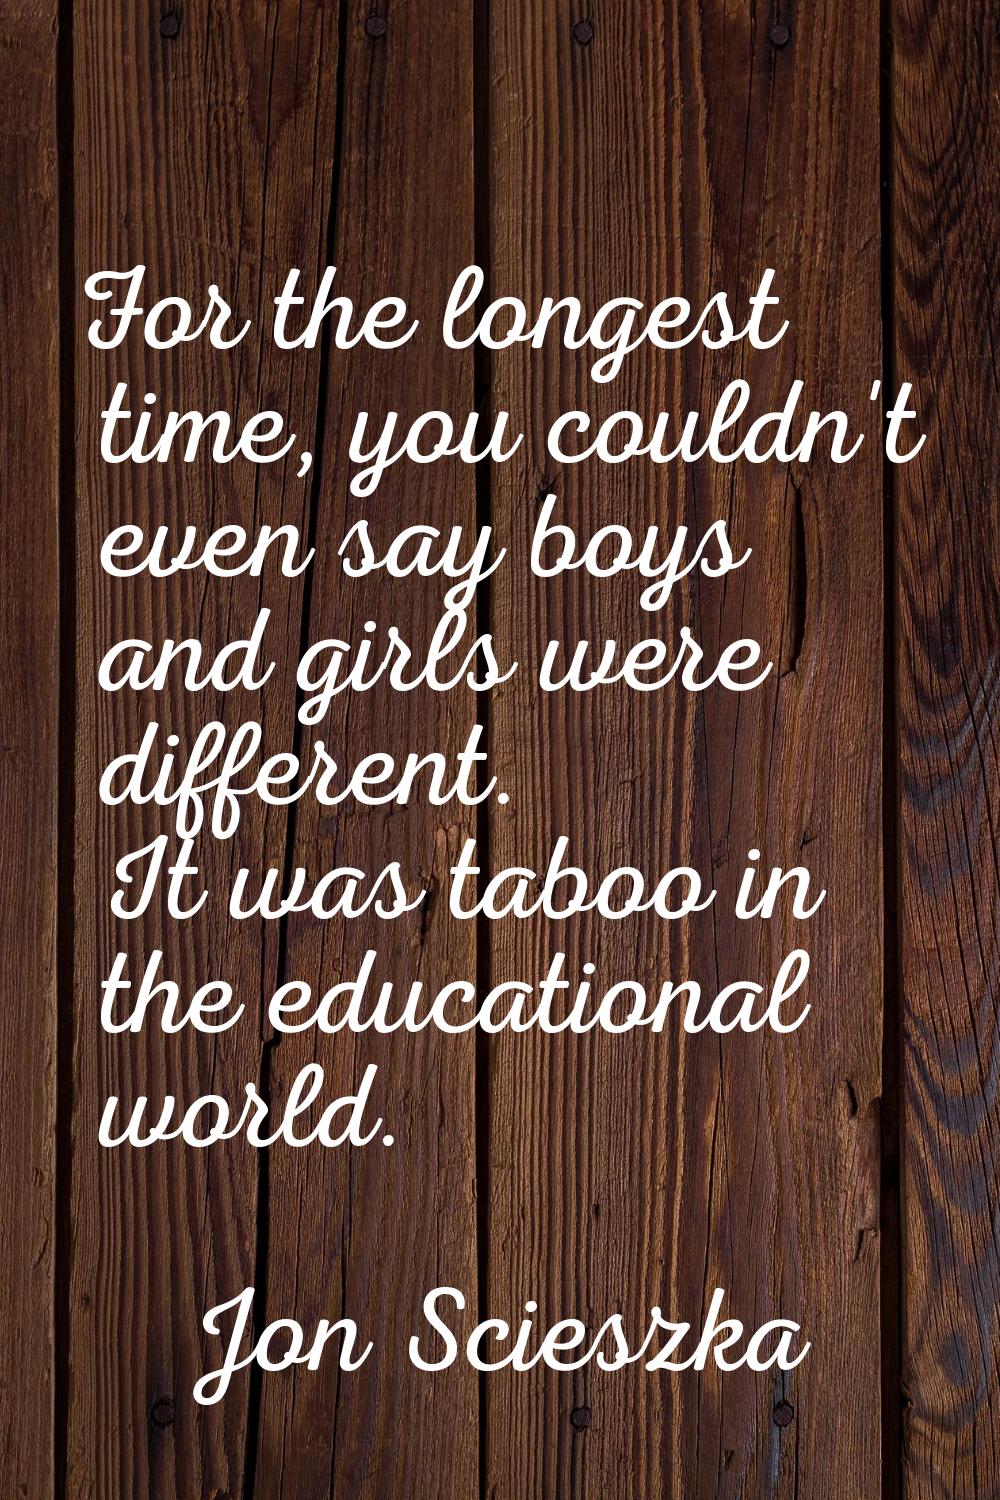 For the longest time, you couldn't even say boys and girls were different. It was taboo in the educ